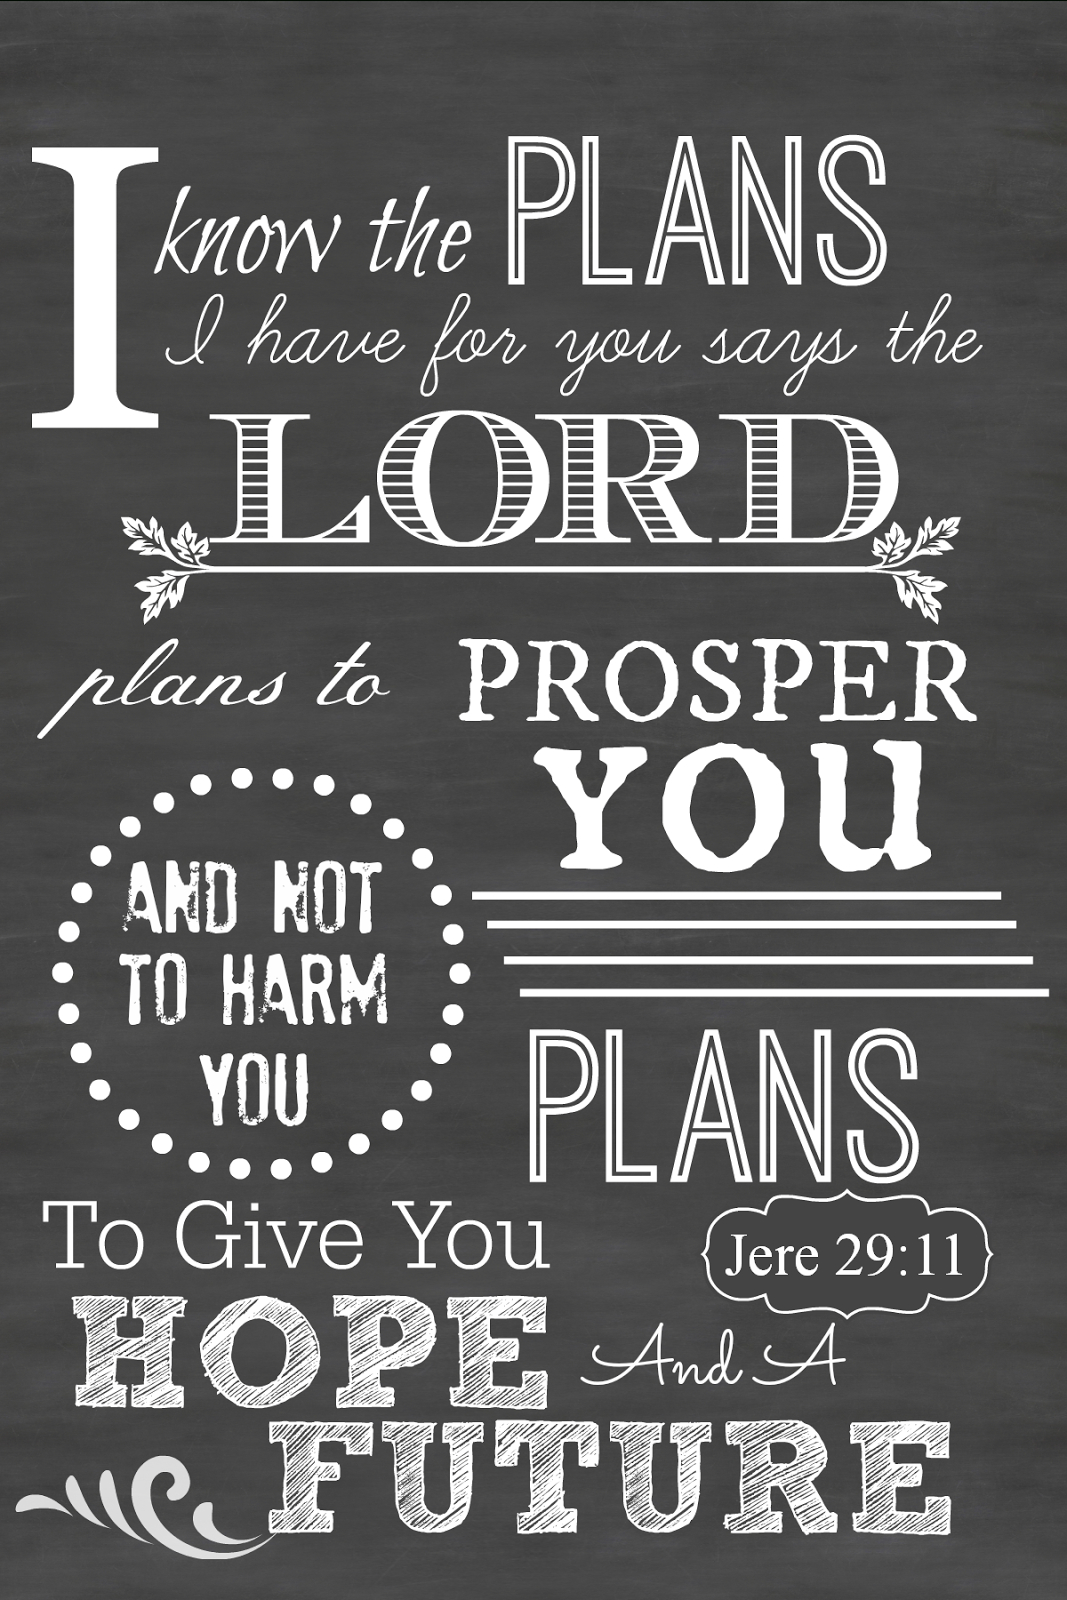 I Love This Encouraging Words From The Lord! ~ Free Printable - Jeremiah 29 11 Free Printable